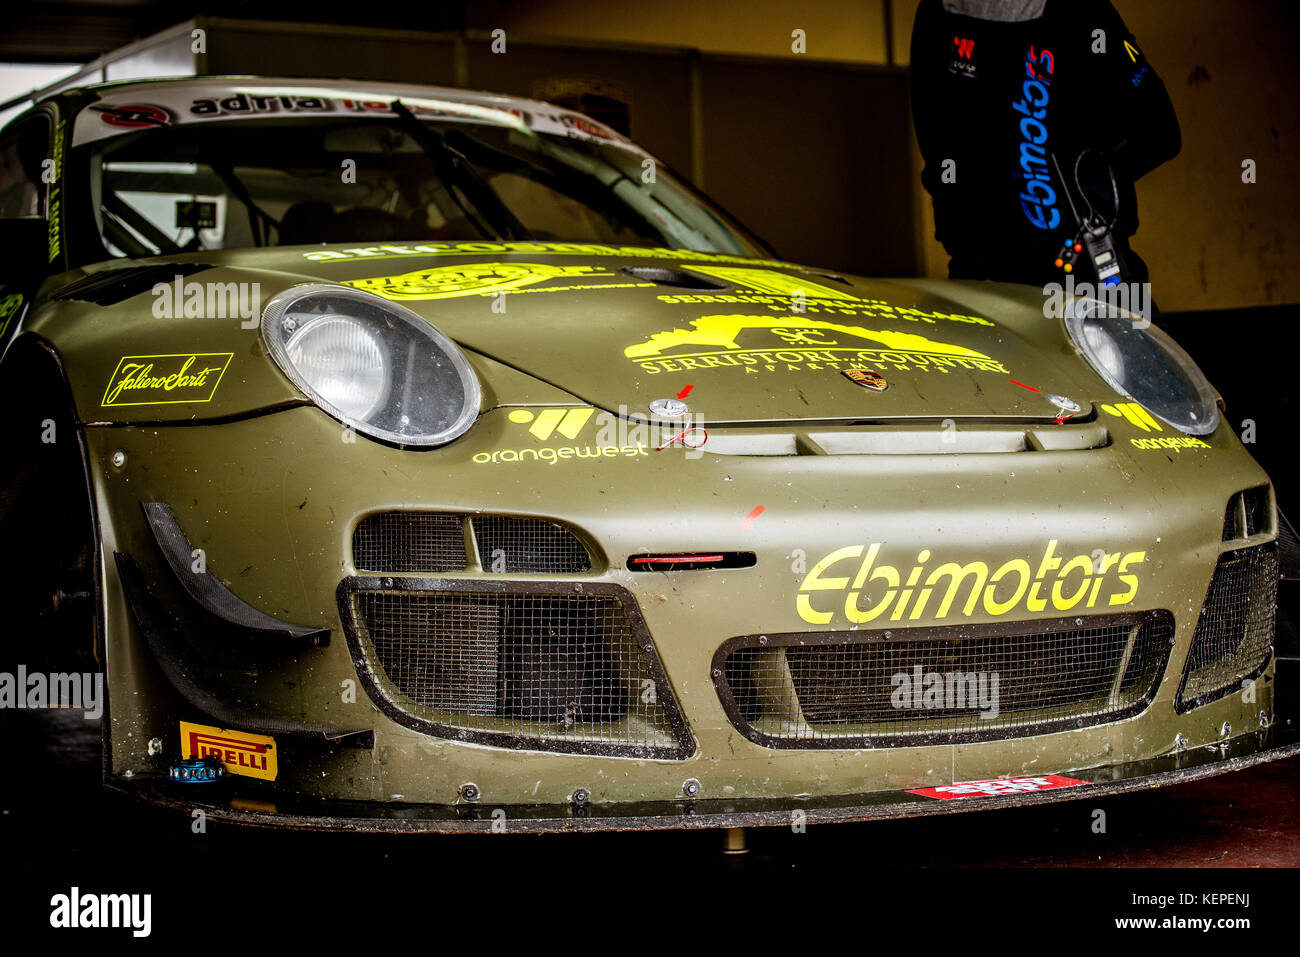 Racing Porsche car in the paddock, dirty nose detail Stock Photo